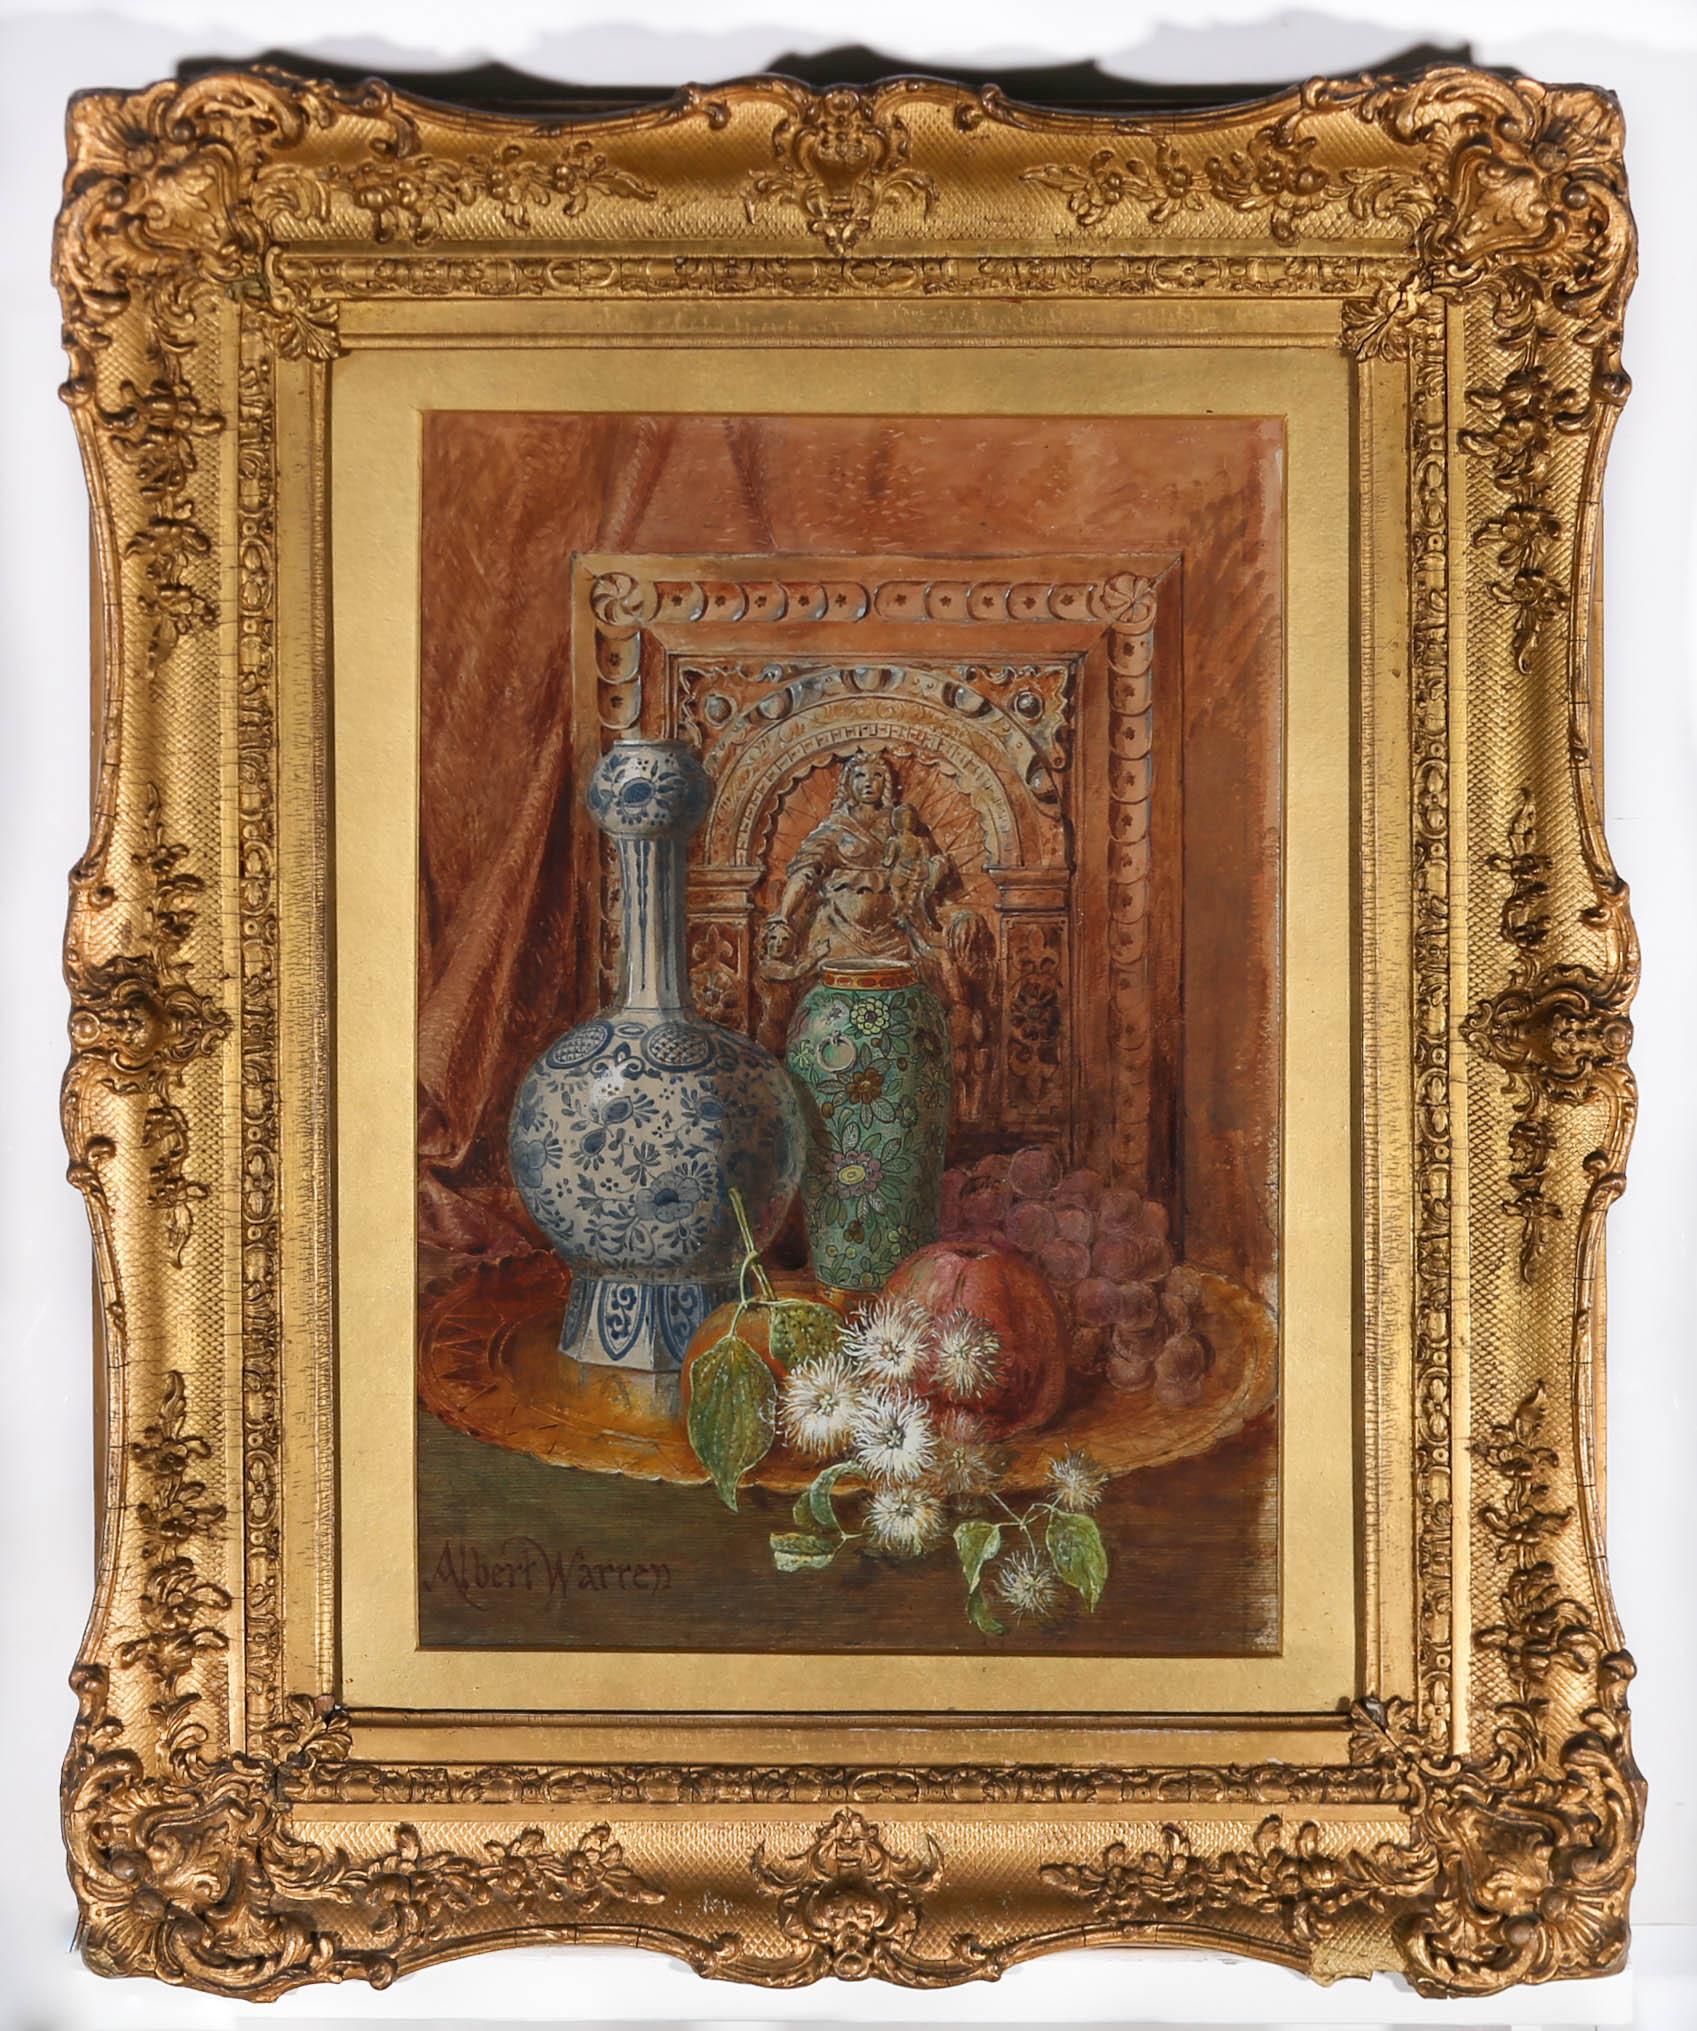 A finely detailed, late Victorian still life in watercolour, showing floral vases, a carved icon tile, fruit and a sprig of old man's beard, all on a brass tray. The painting shows the exactitude and skill of the artist's hand, refined over many